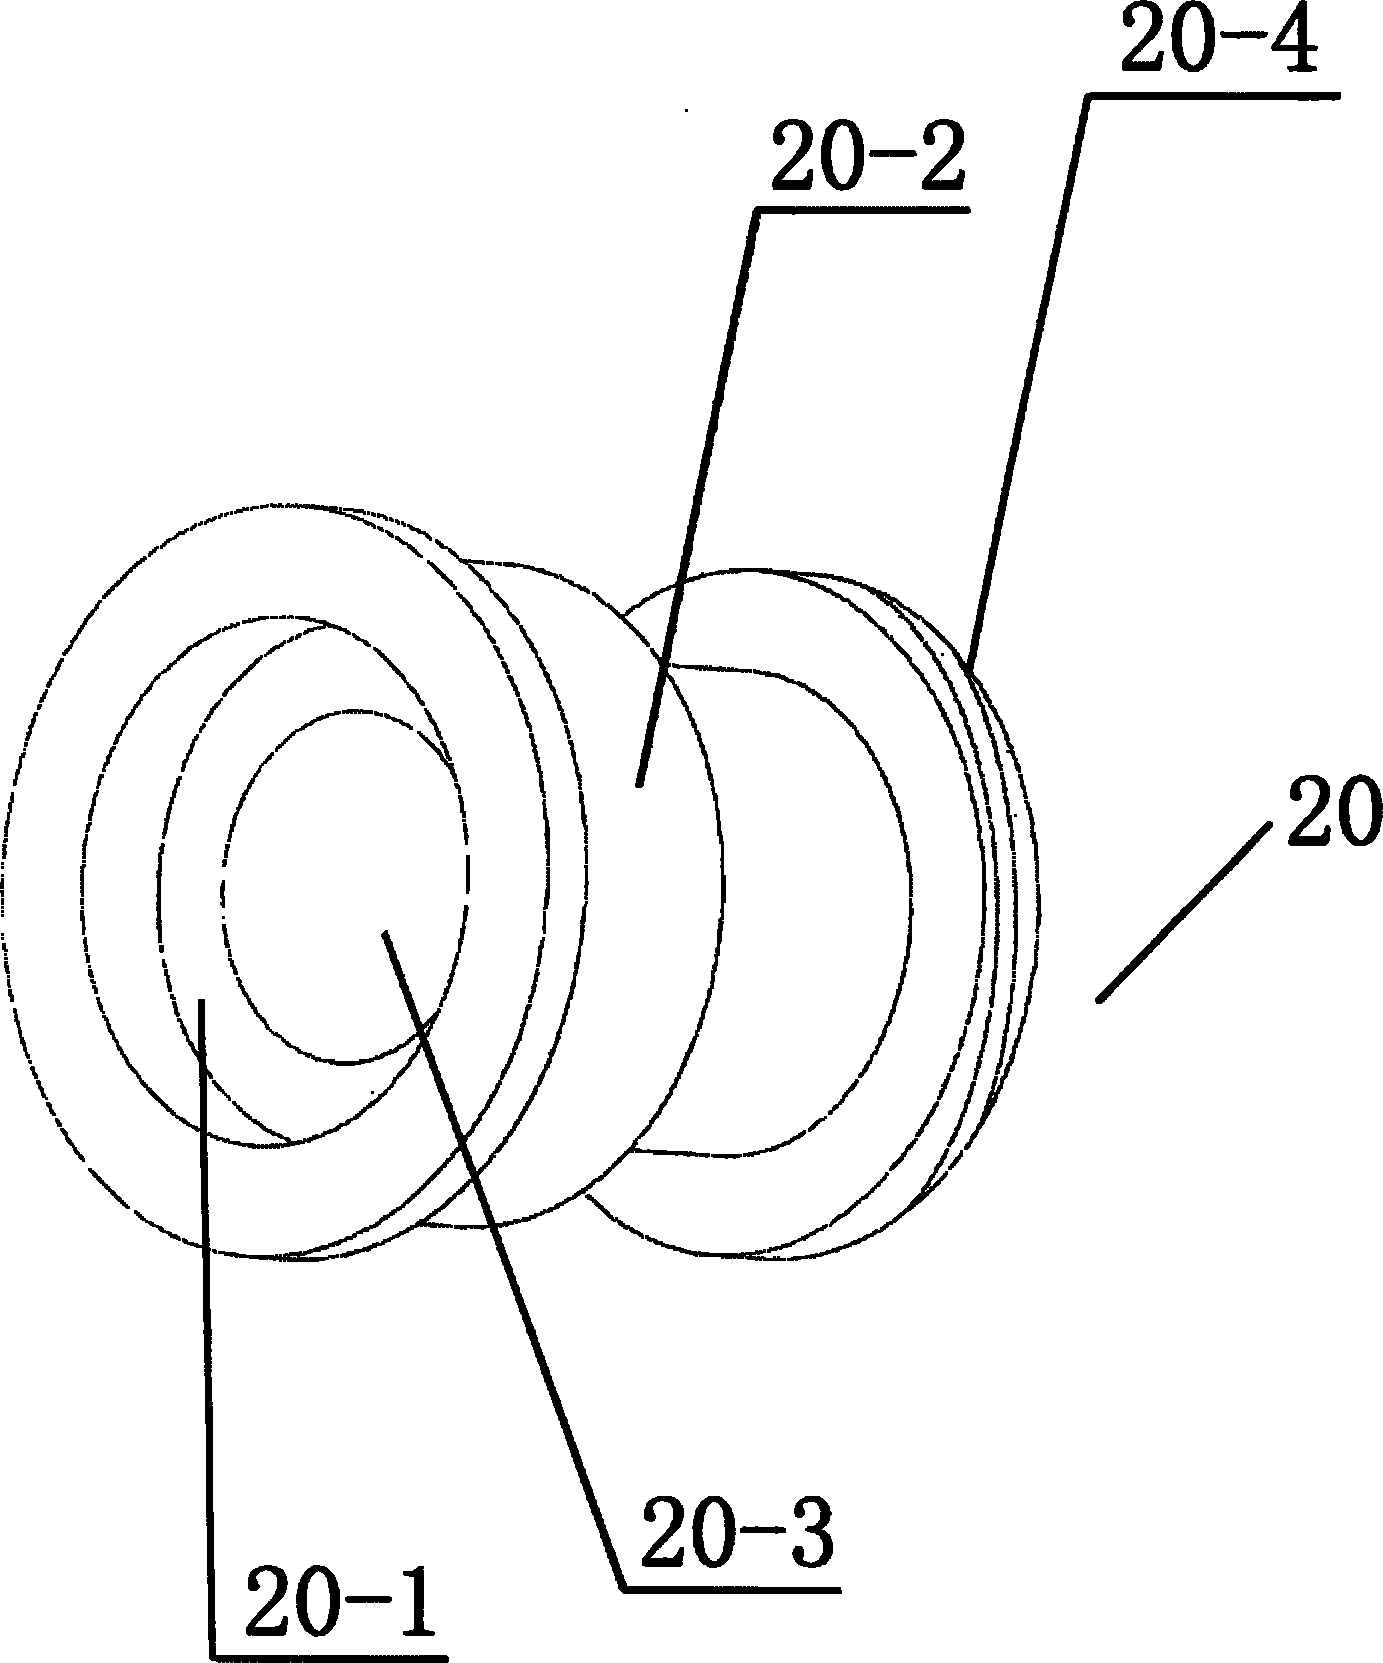 Variable speed wheel-disc integrated mid-motor in electrical bicycle